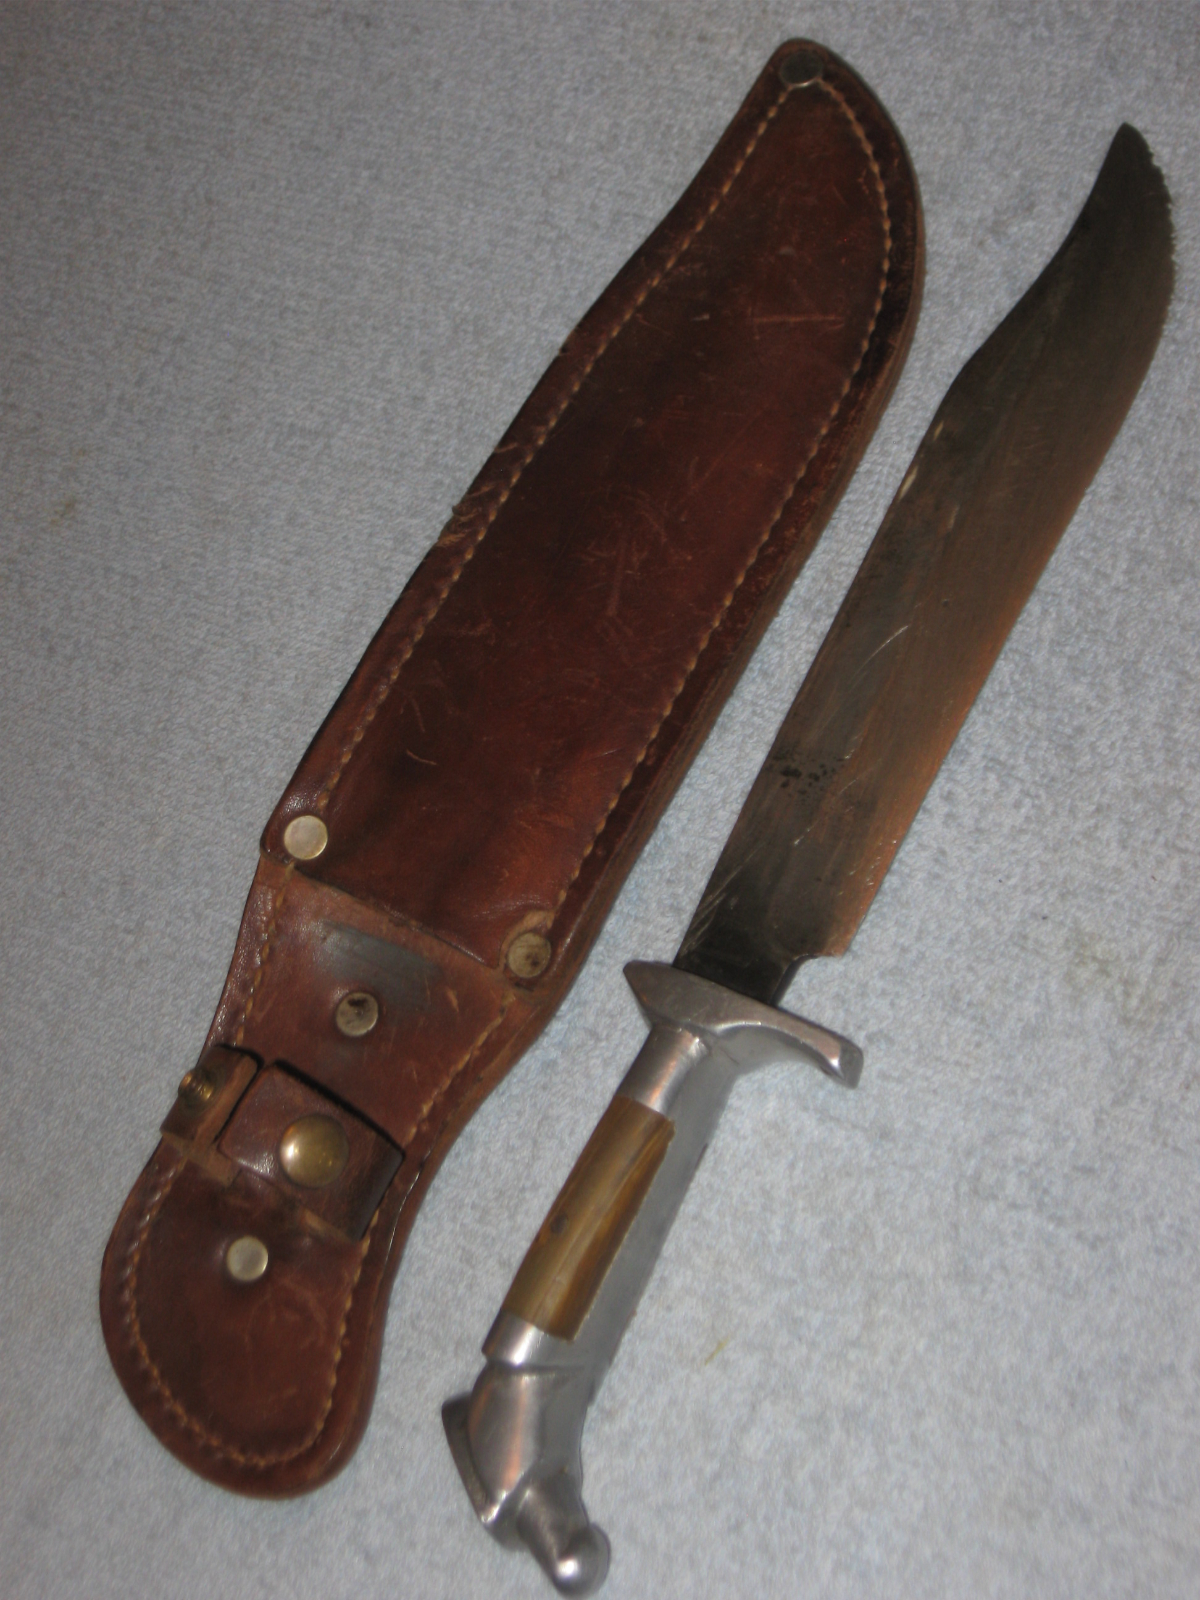 Vintage Mexican bowie knife with sheath